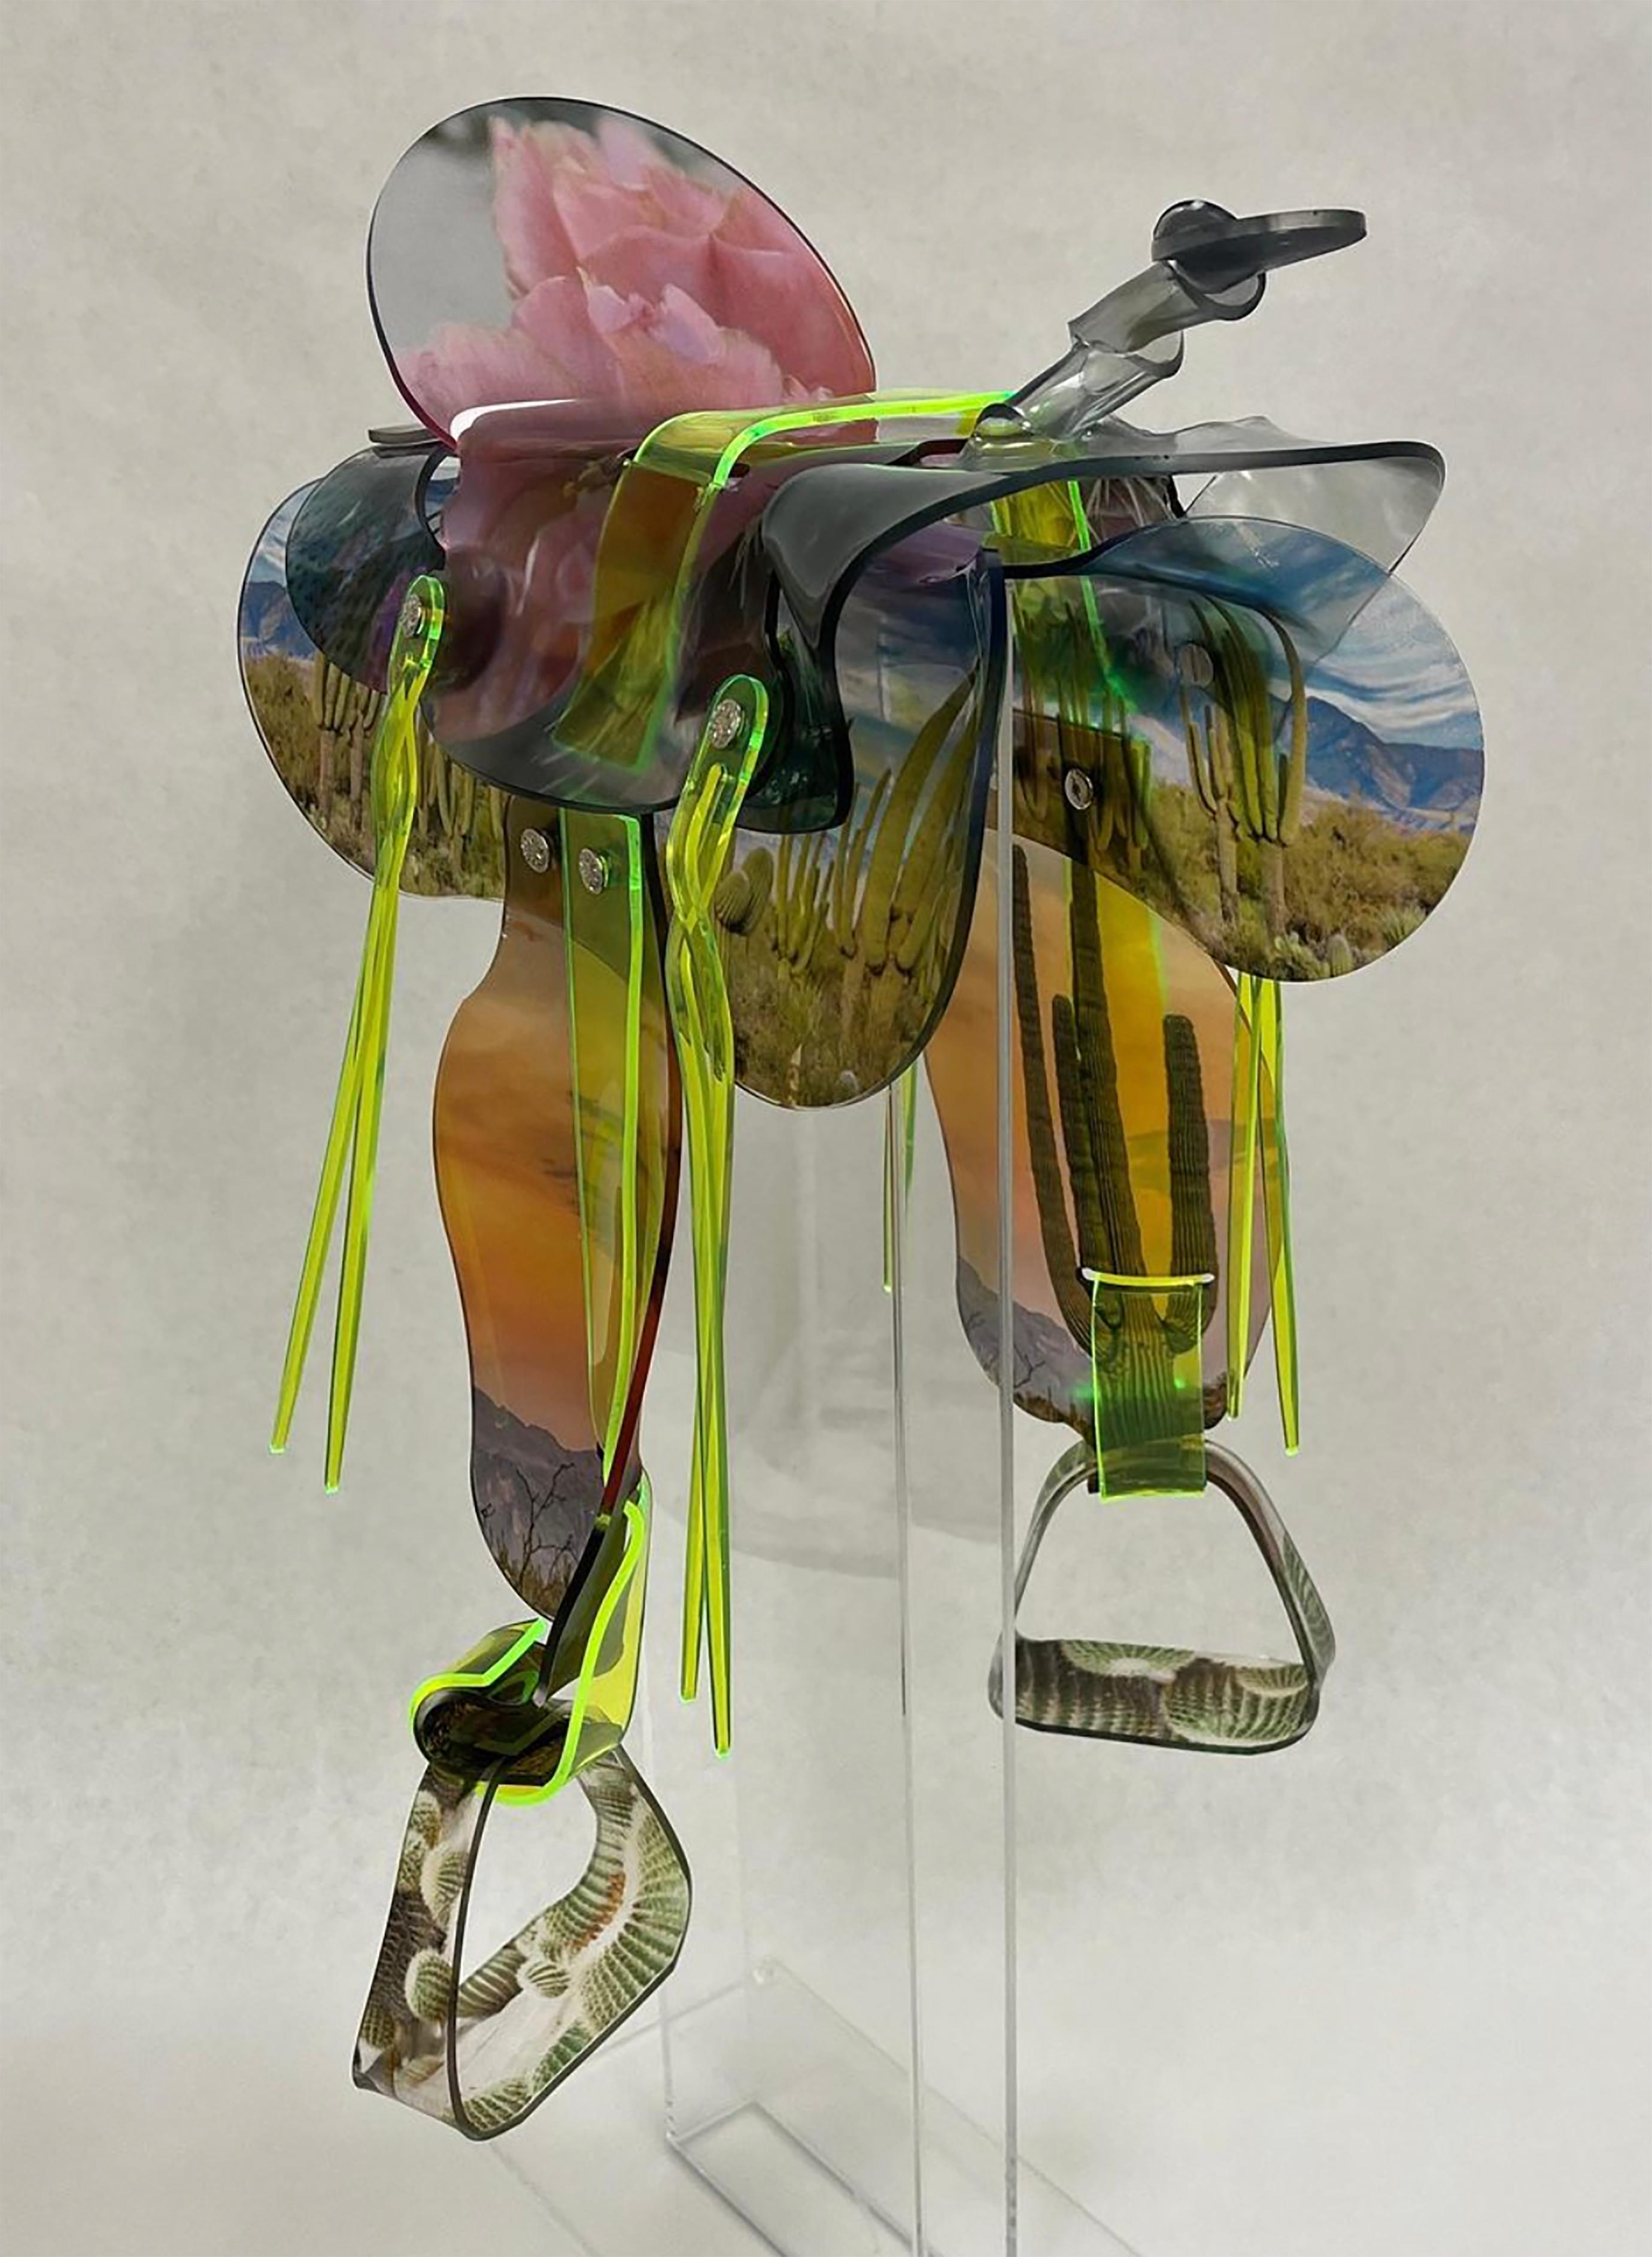 Maeve Eichelberger Figurative Sculpture - "The Neon Desert" - UV inks printed on neon acrylic- hand formed